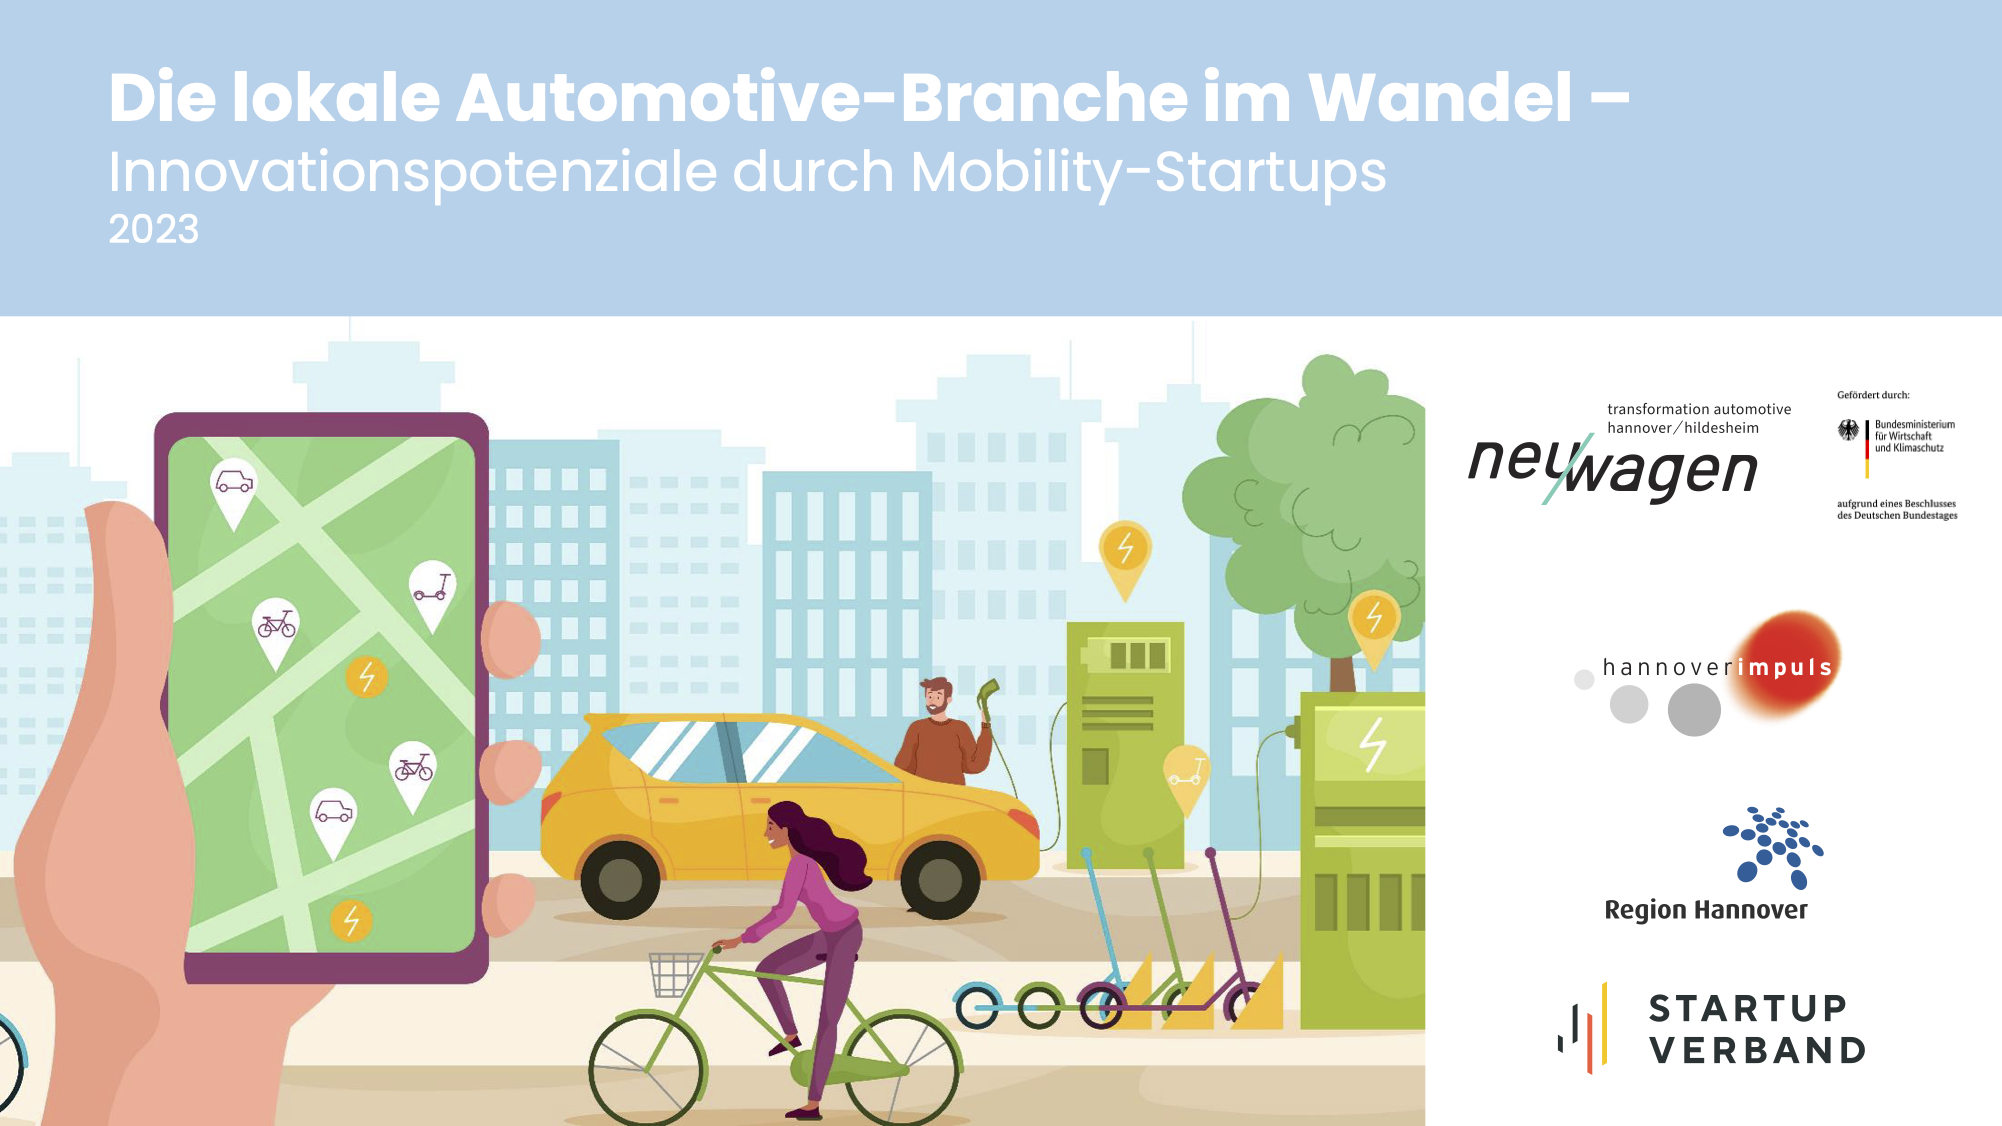 Die Automotive-Branche im Wandel: Innovationspotentiale durch Mobility-Startups